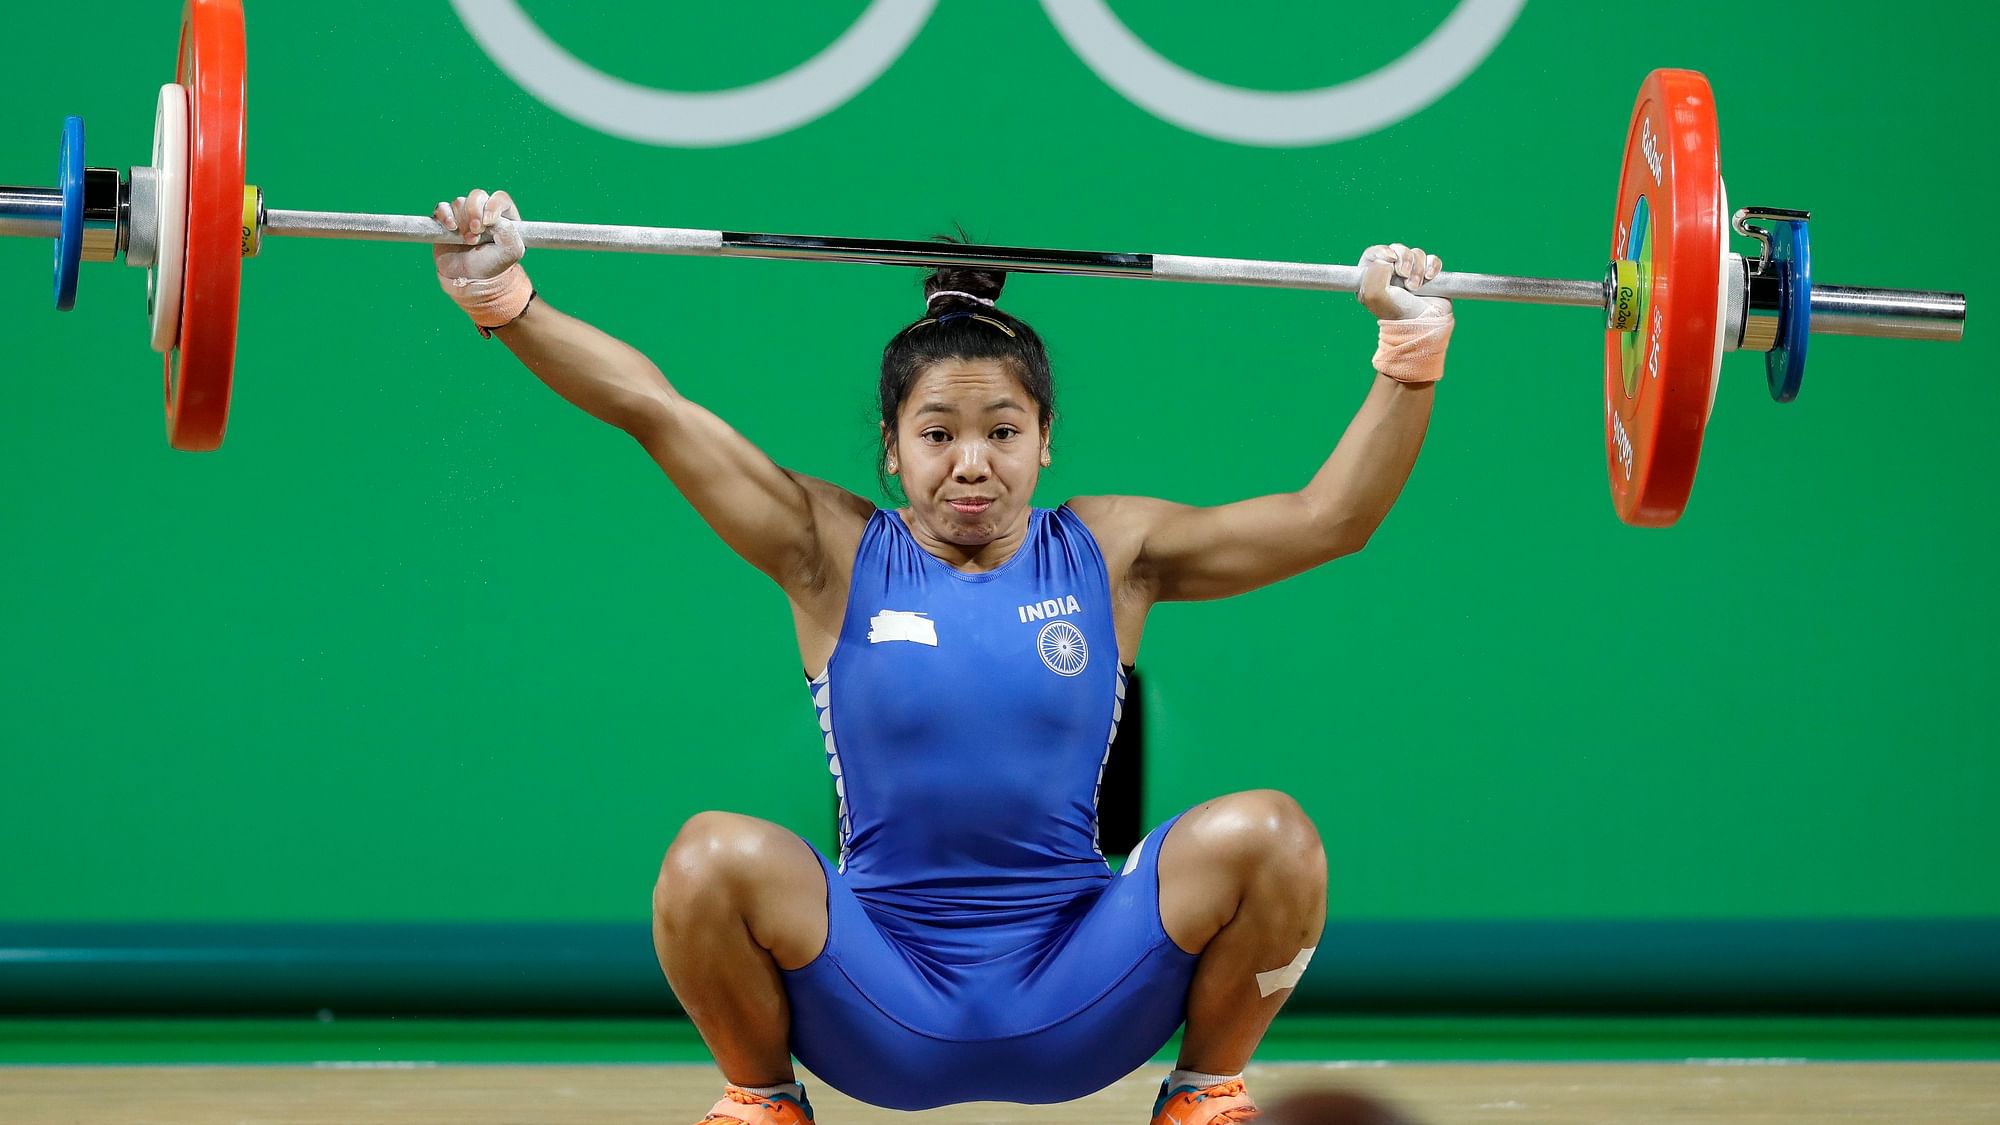 Saikhom Mirabai Chanu is a sure shot entry in the weightlifting category for the 2020 Olympics.